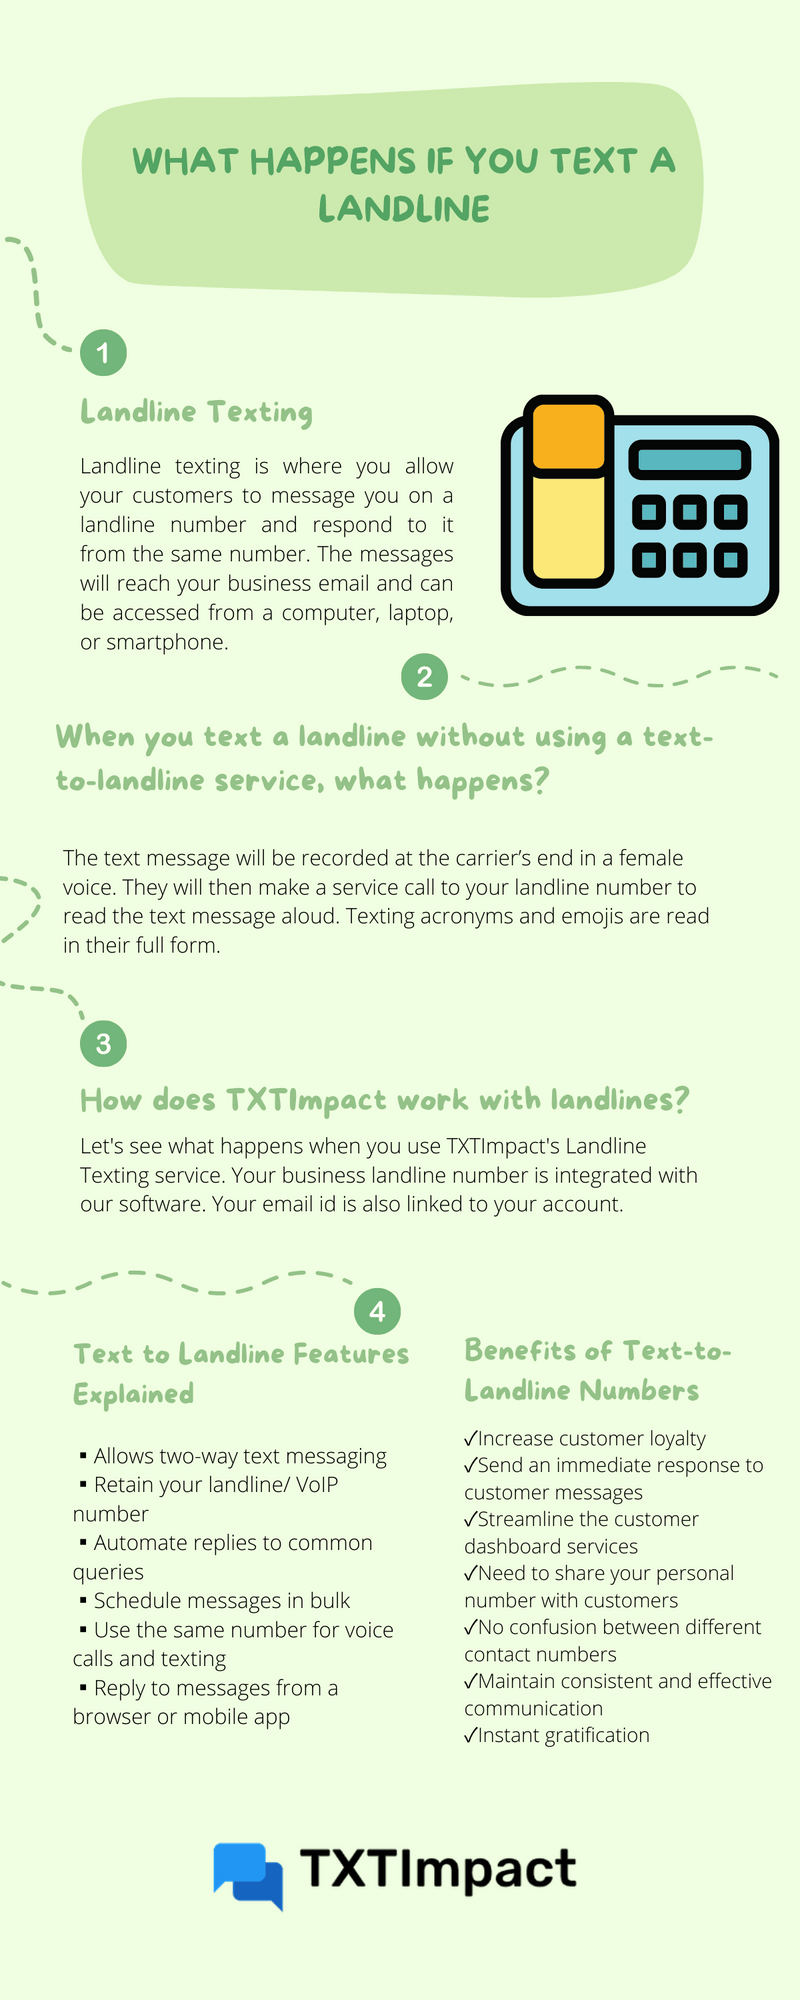 What Happens If You Text a Landline (1).png